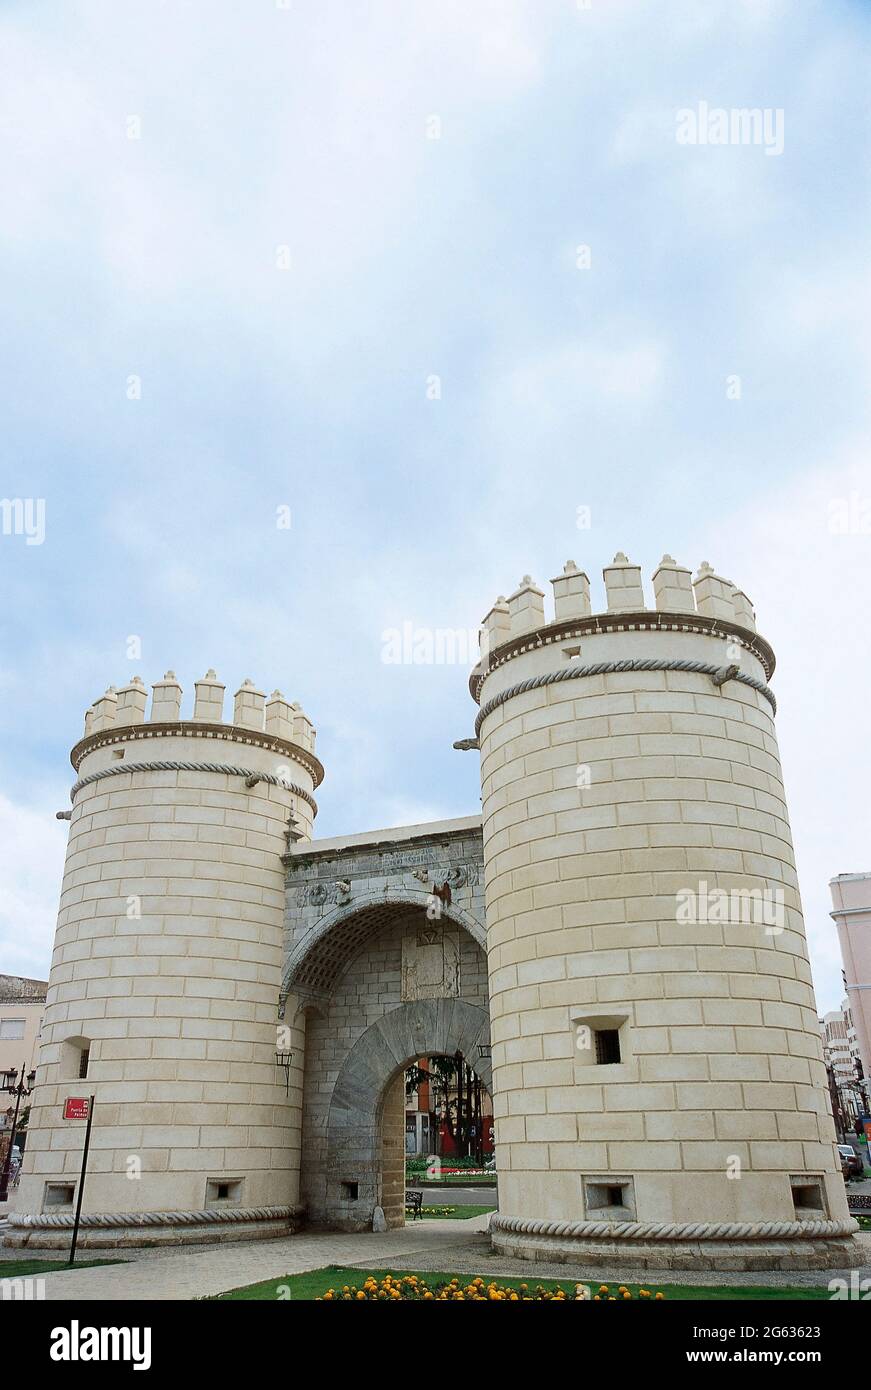 Spain, Extremadura, Badajoz. View of the Gate of Palms (Puerta de Palmas). Built in the first half of the 16th century to control the bridge over Guadiana river. It has two crenellated towers surrounded by the franciscan cord and joined by a semicircular arch. Stock Photo